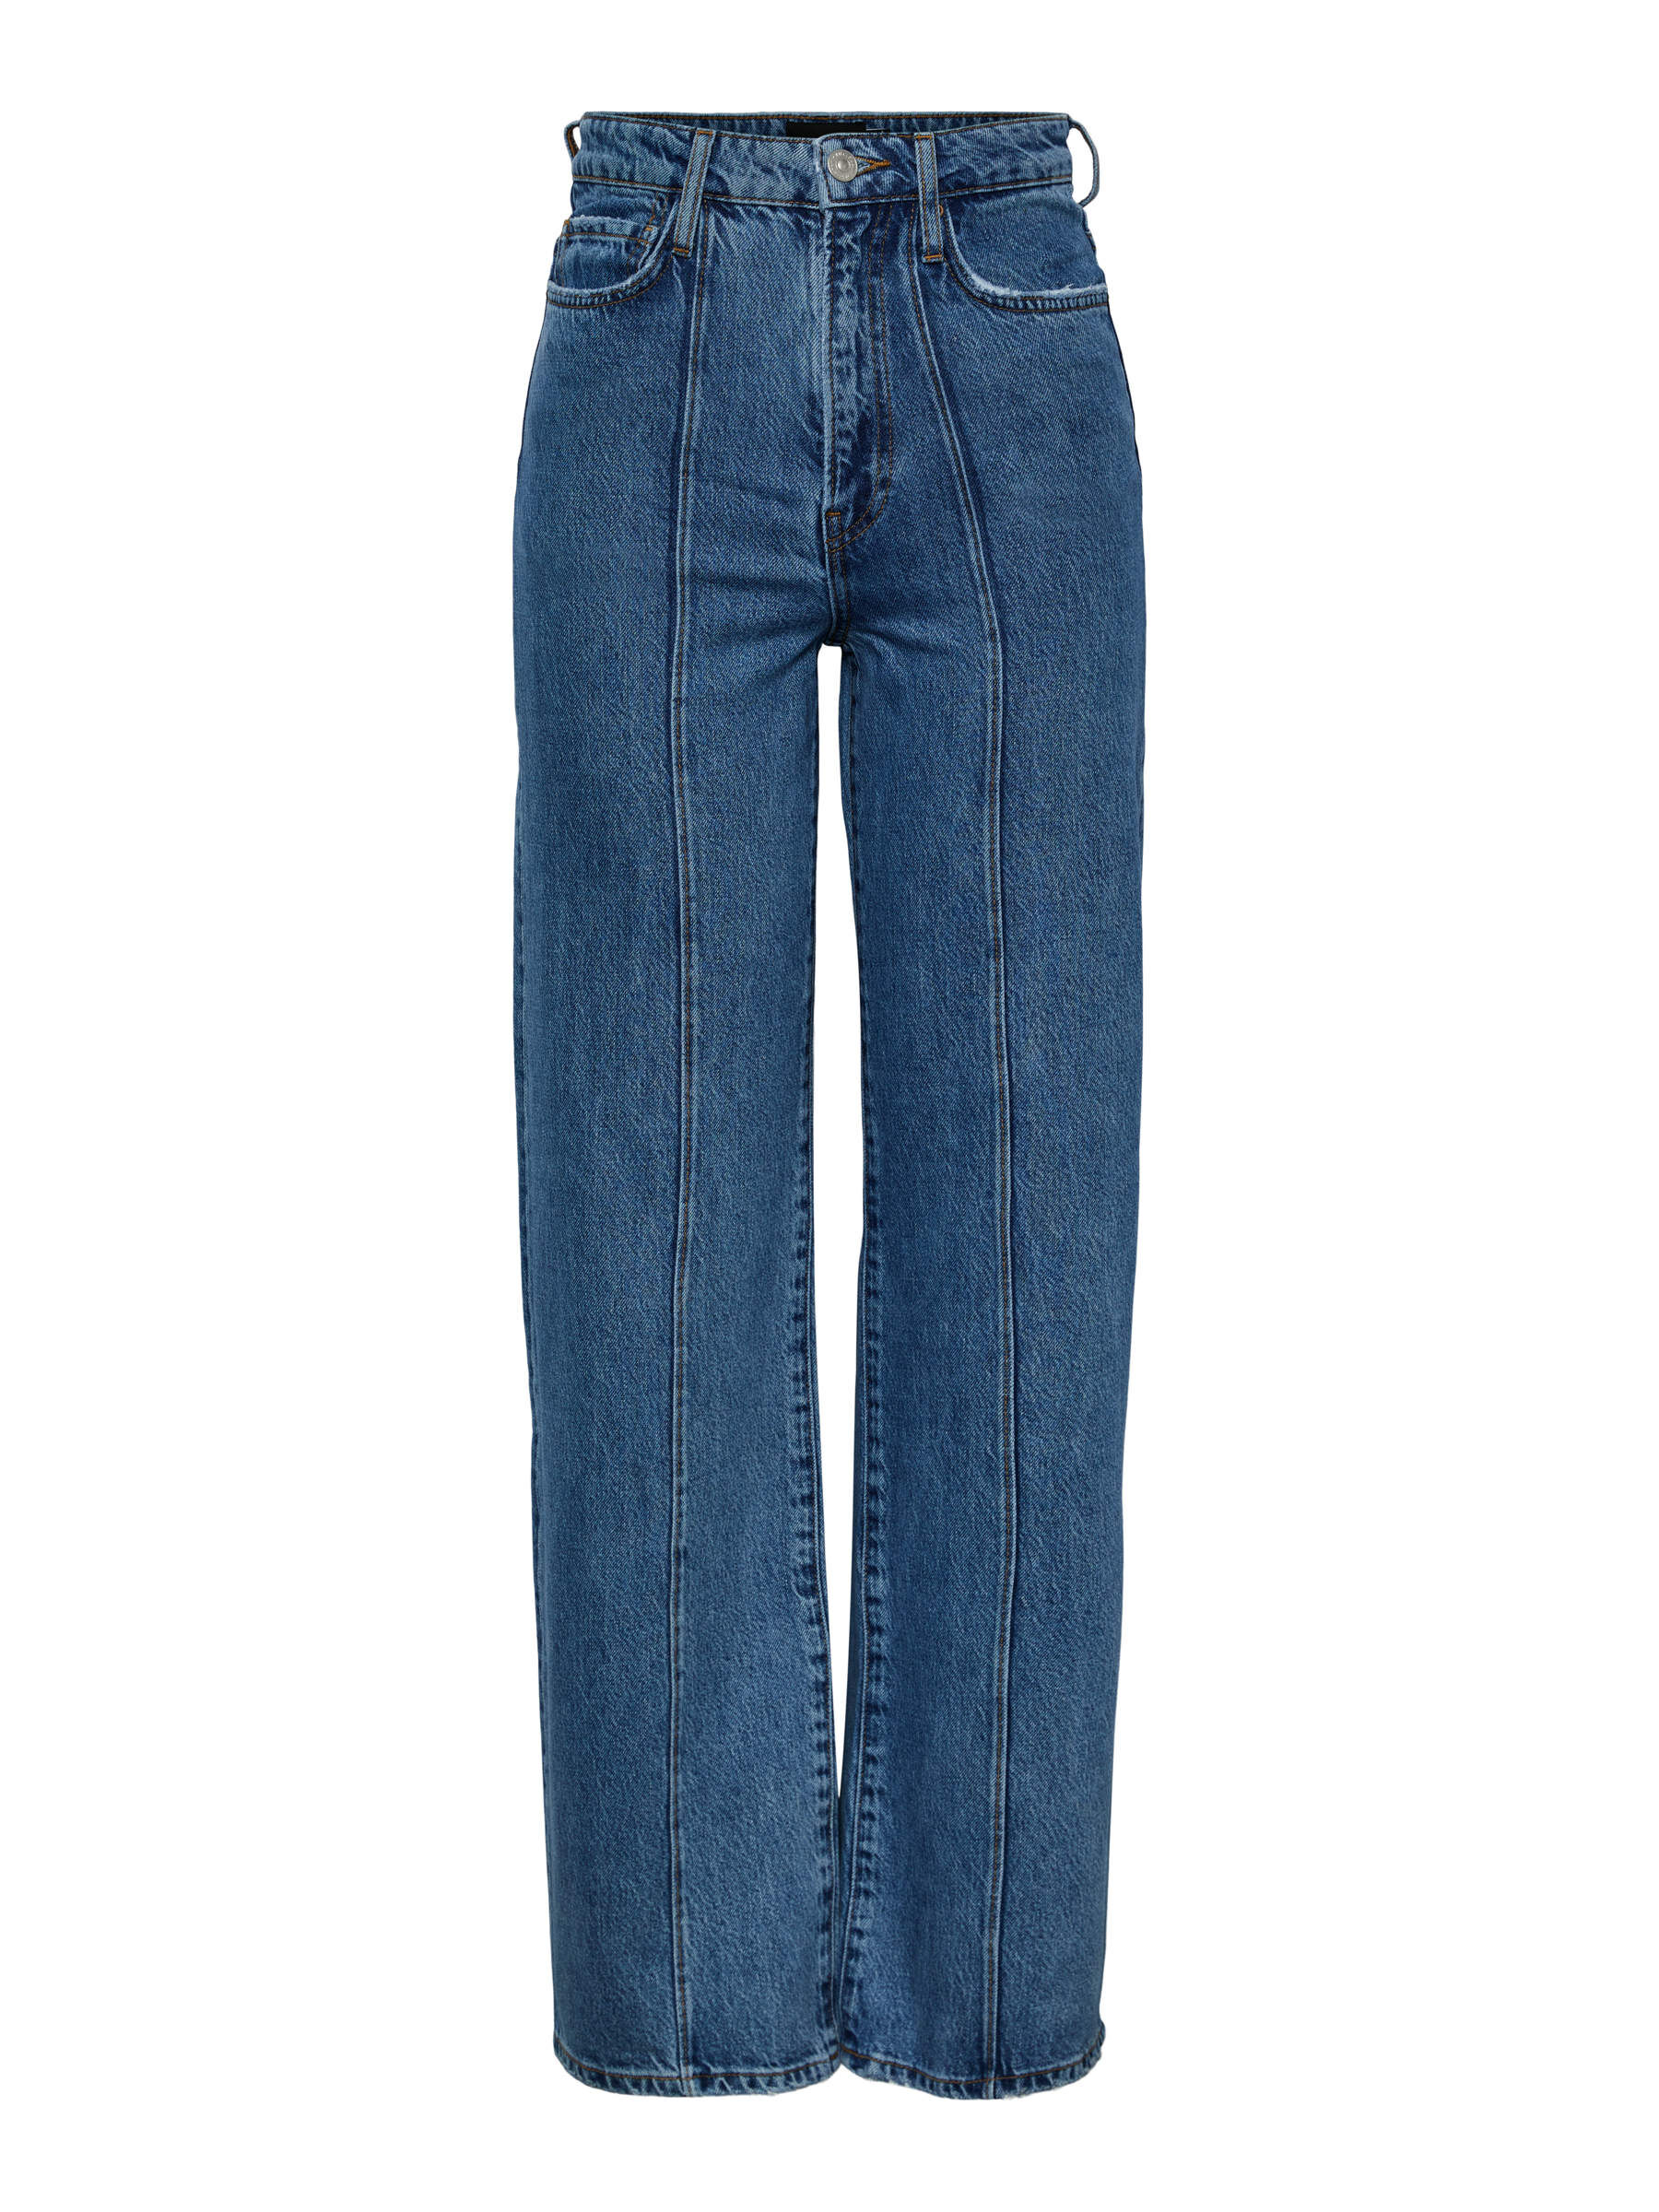 Jeans for women | Shop from the official PIECES online store